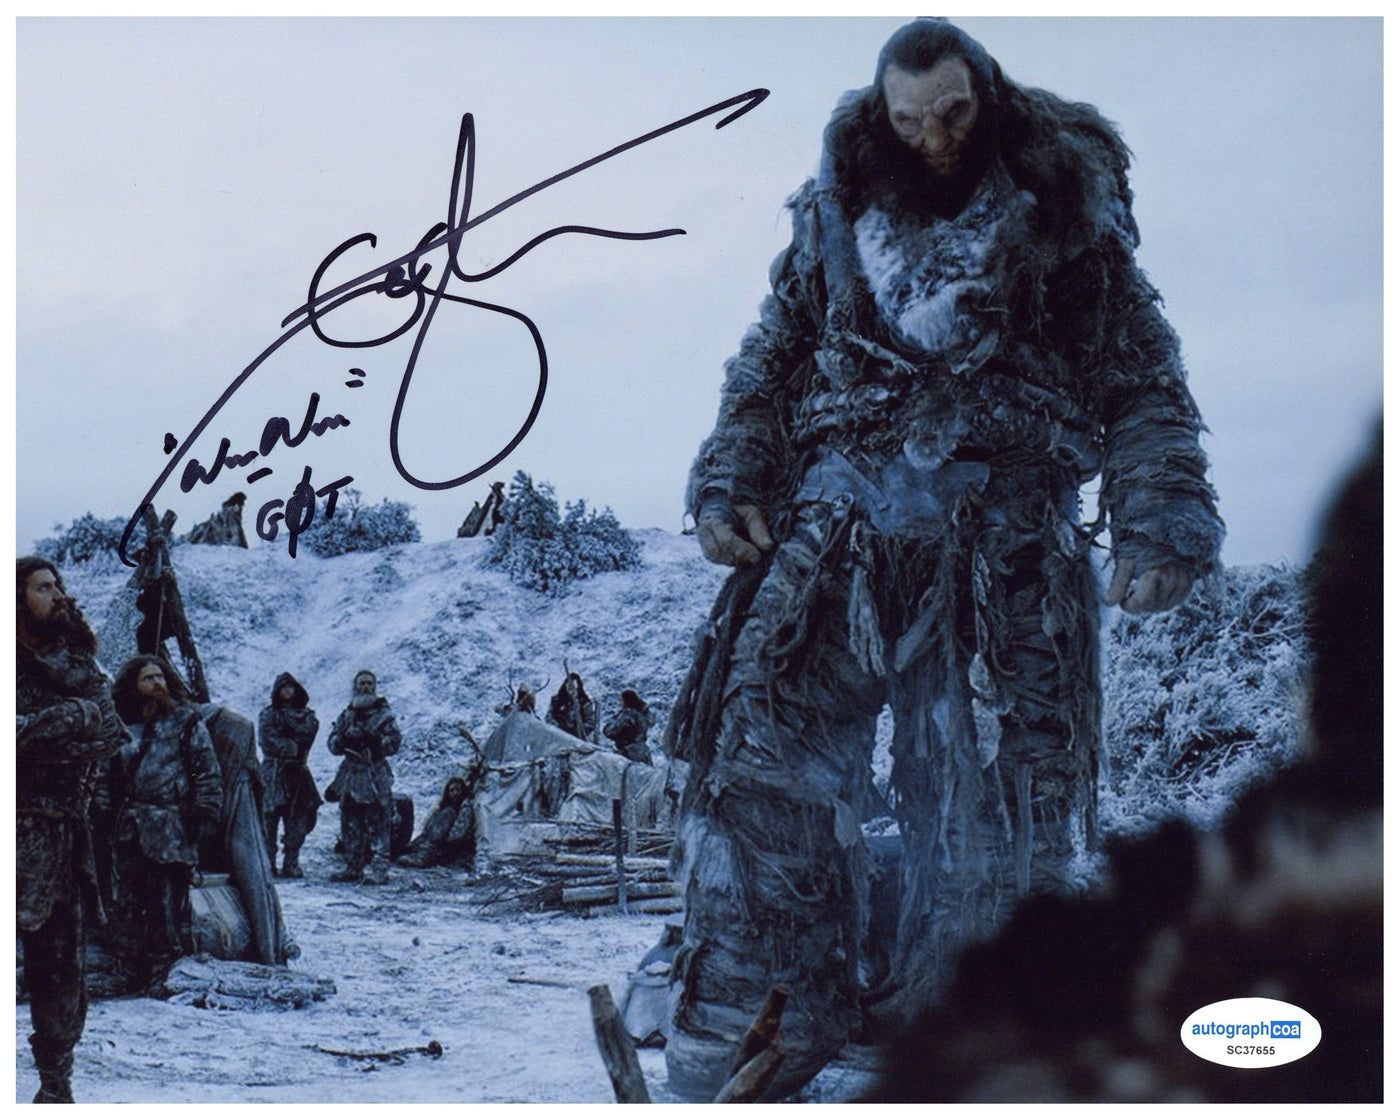 Ian Whyte Signed 8x10 Photo Game of Thrones Autographed ACOA